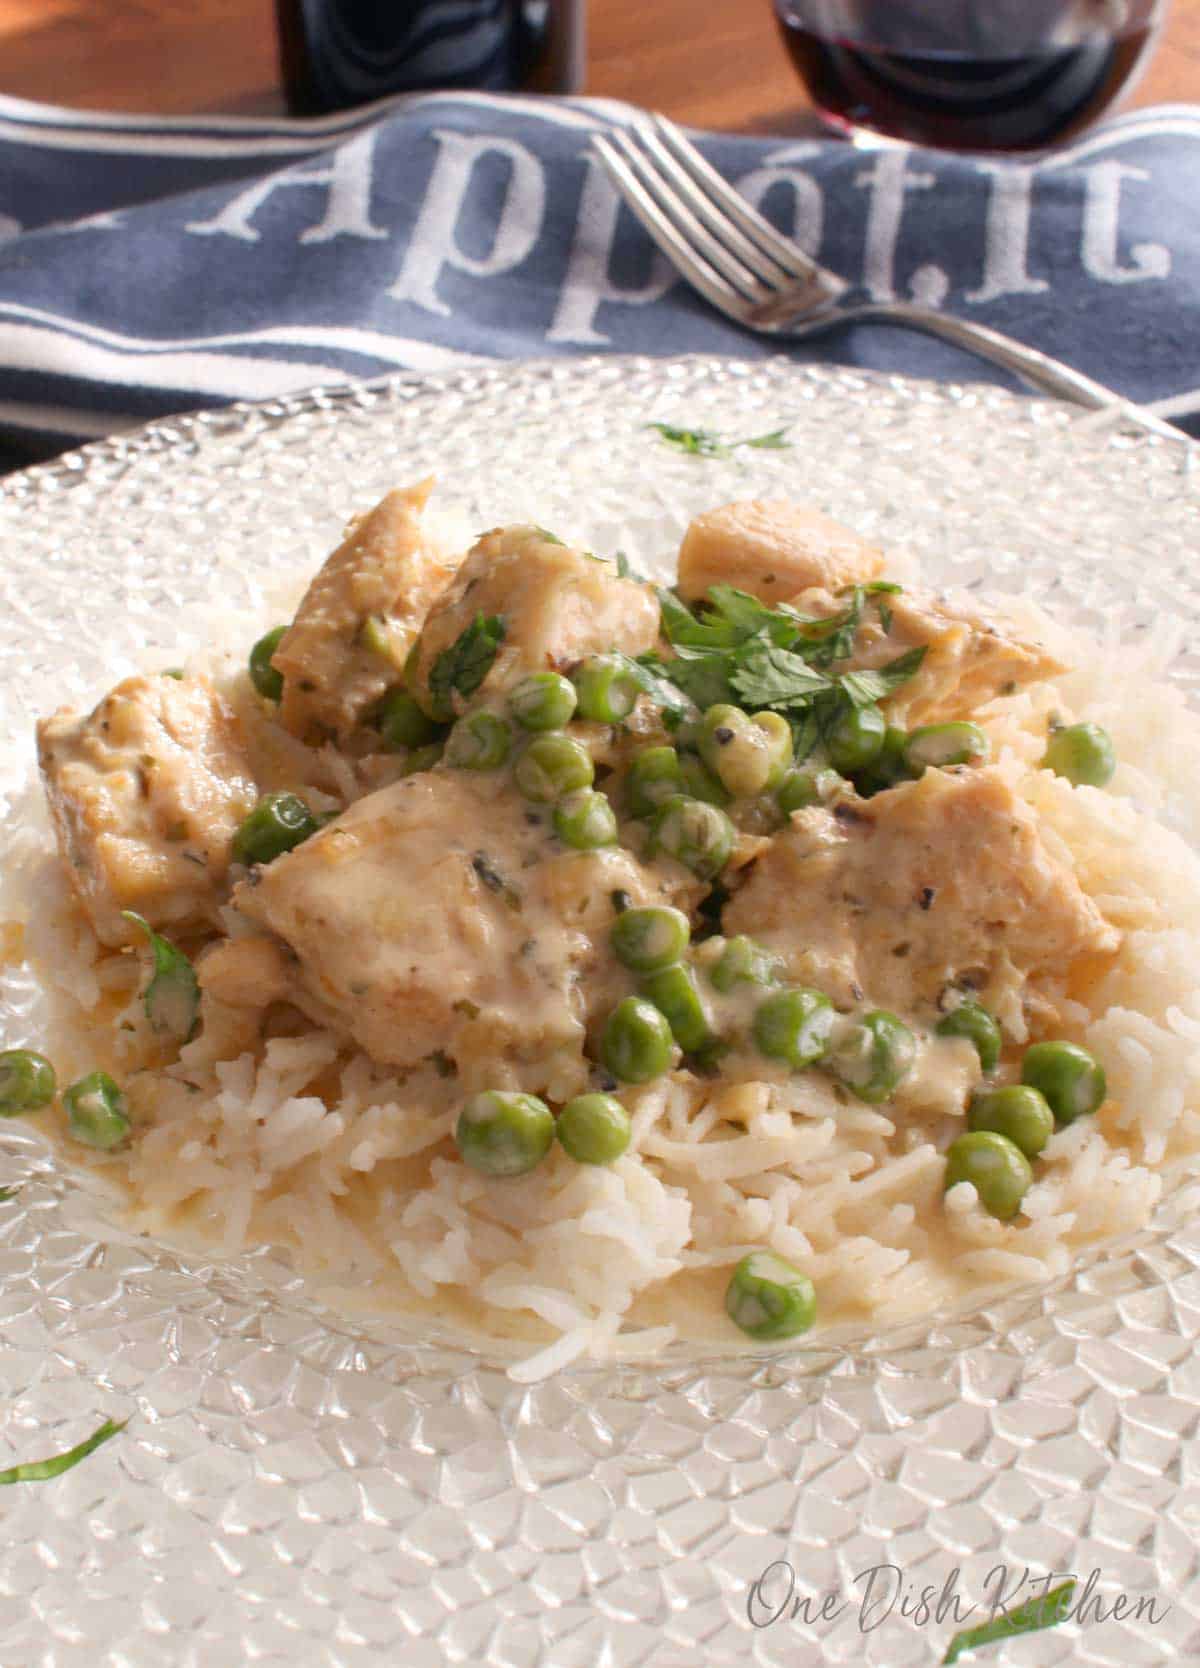 A closeup of a clear glass plate of chicken over white rice with creamy sauce and peas with a blue cloth napkin and a glass of red wine in the background